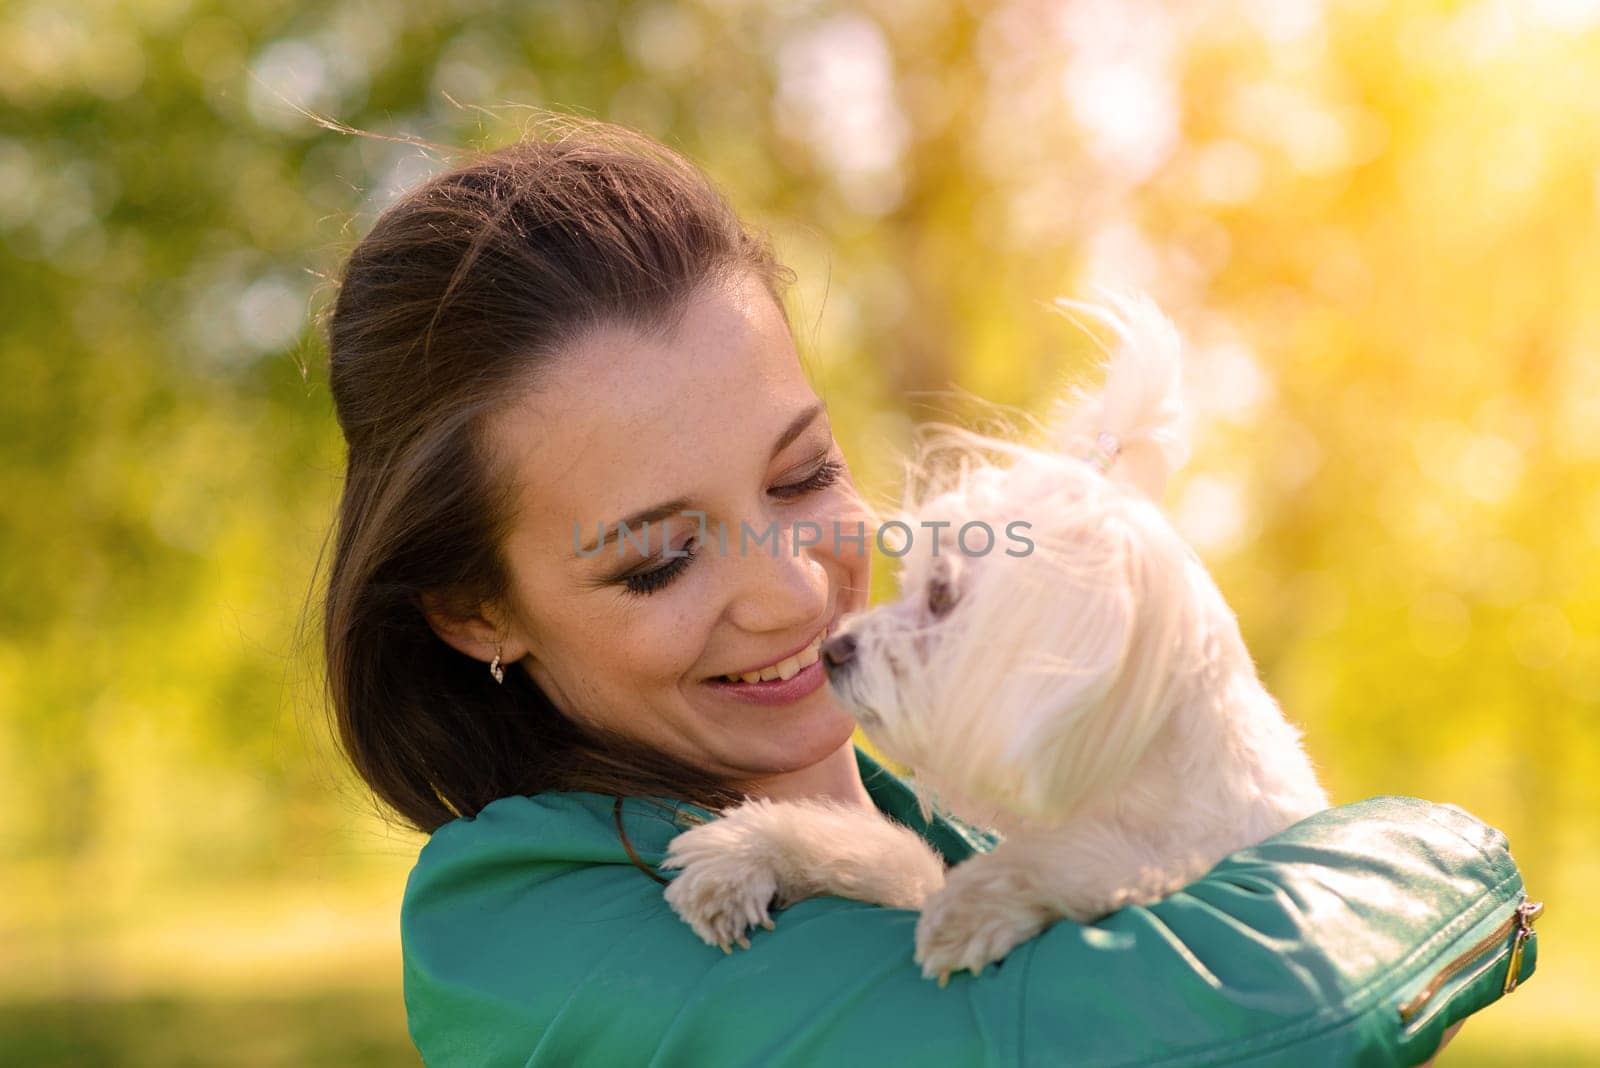 Young girl with her dog. Puppy white dog is running with it's owner. Conception about friendship, animal and freedom.